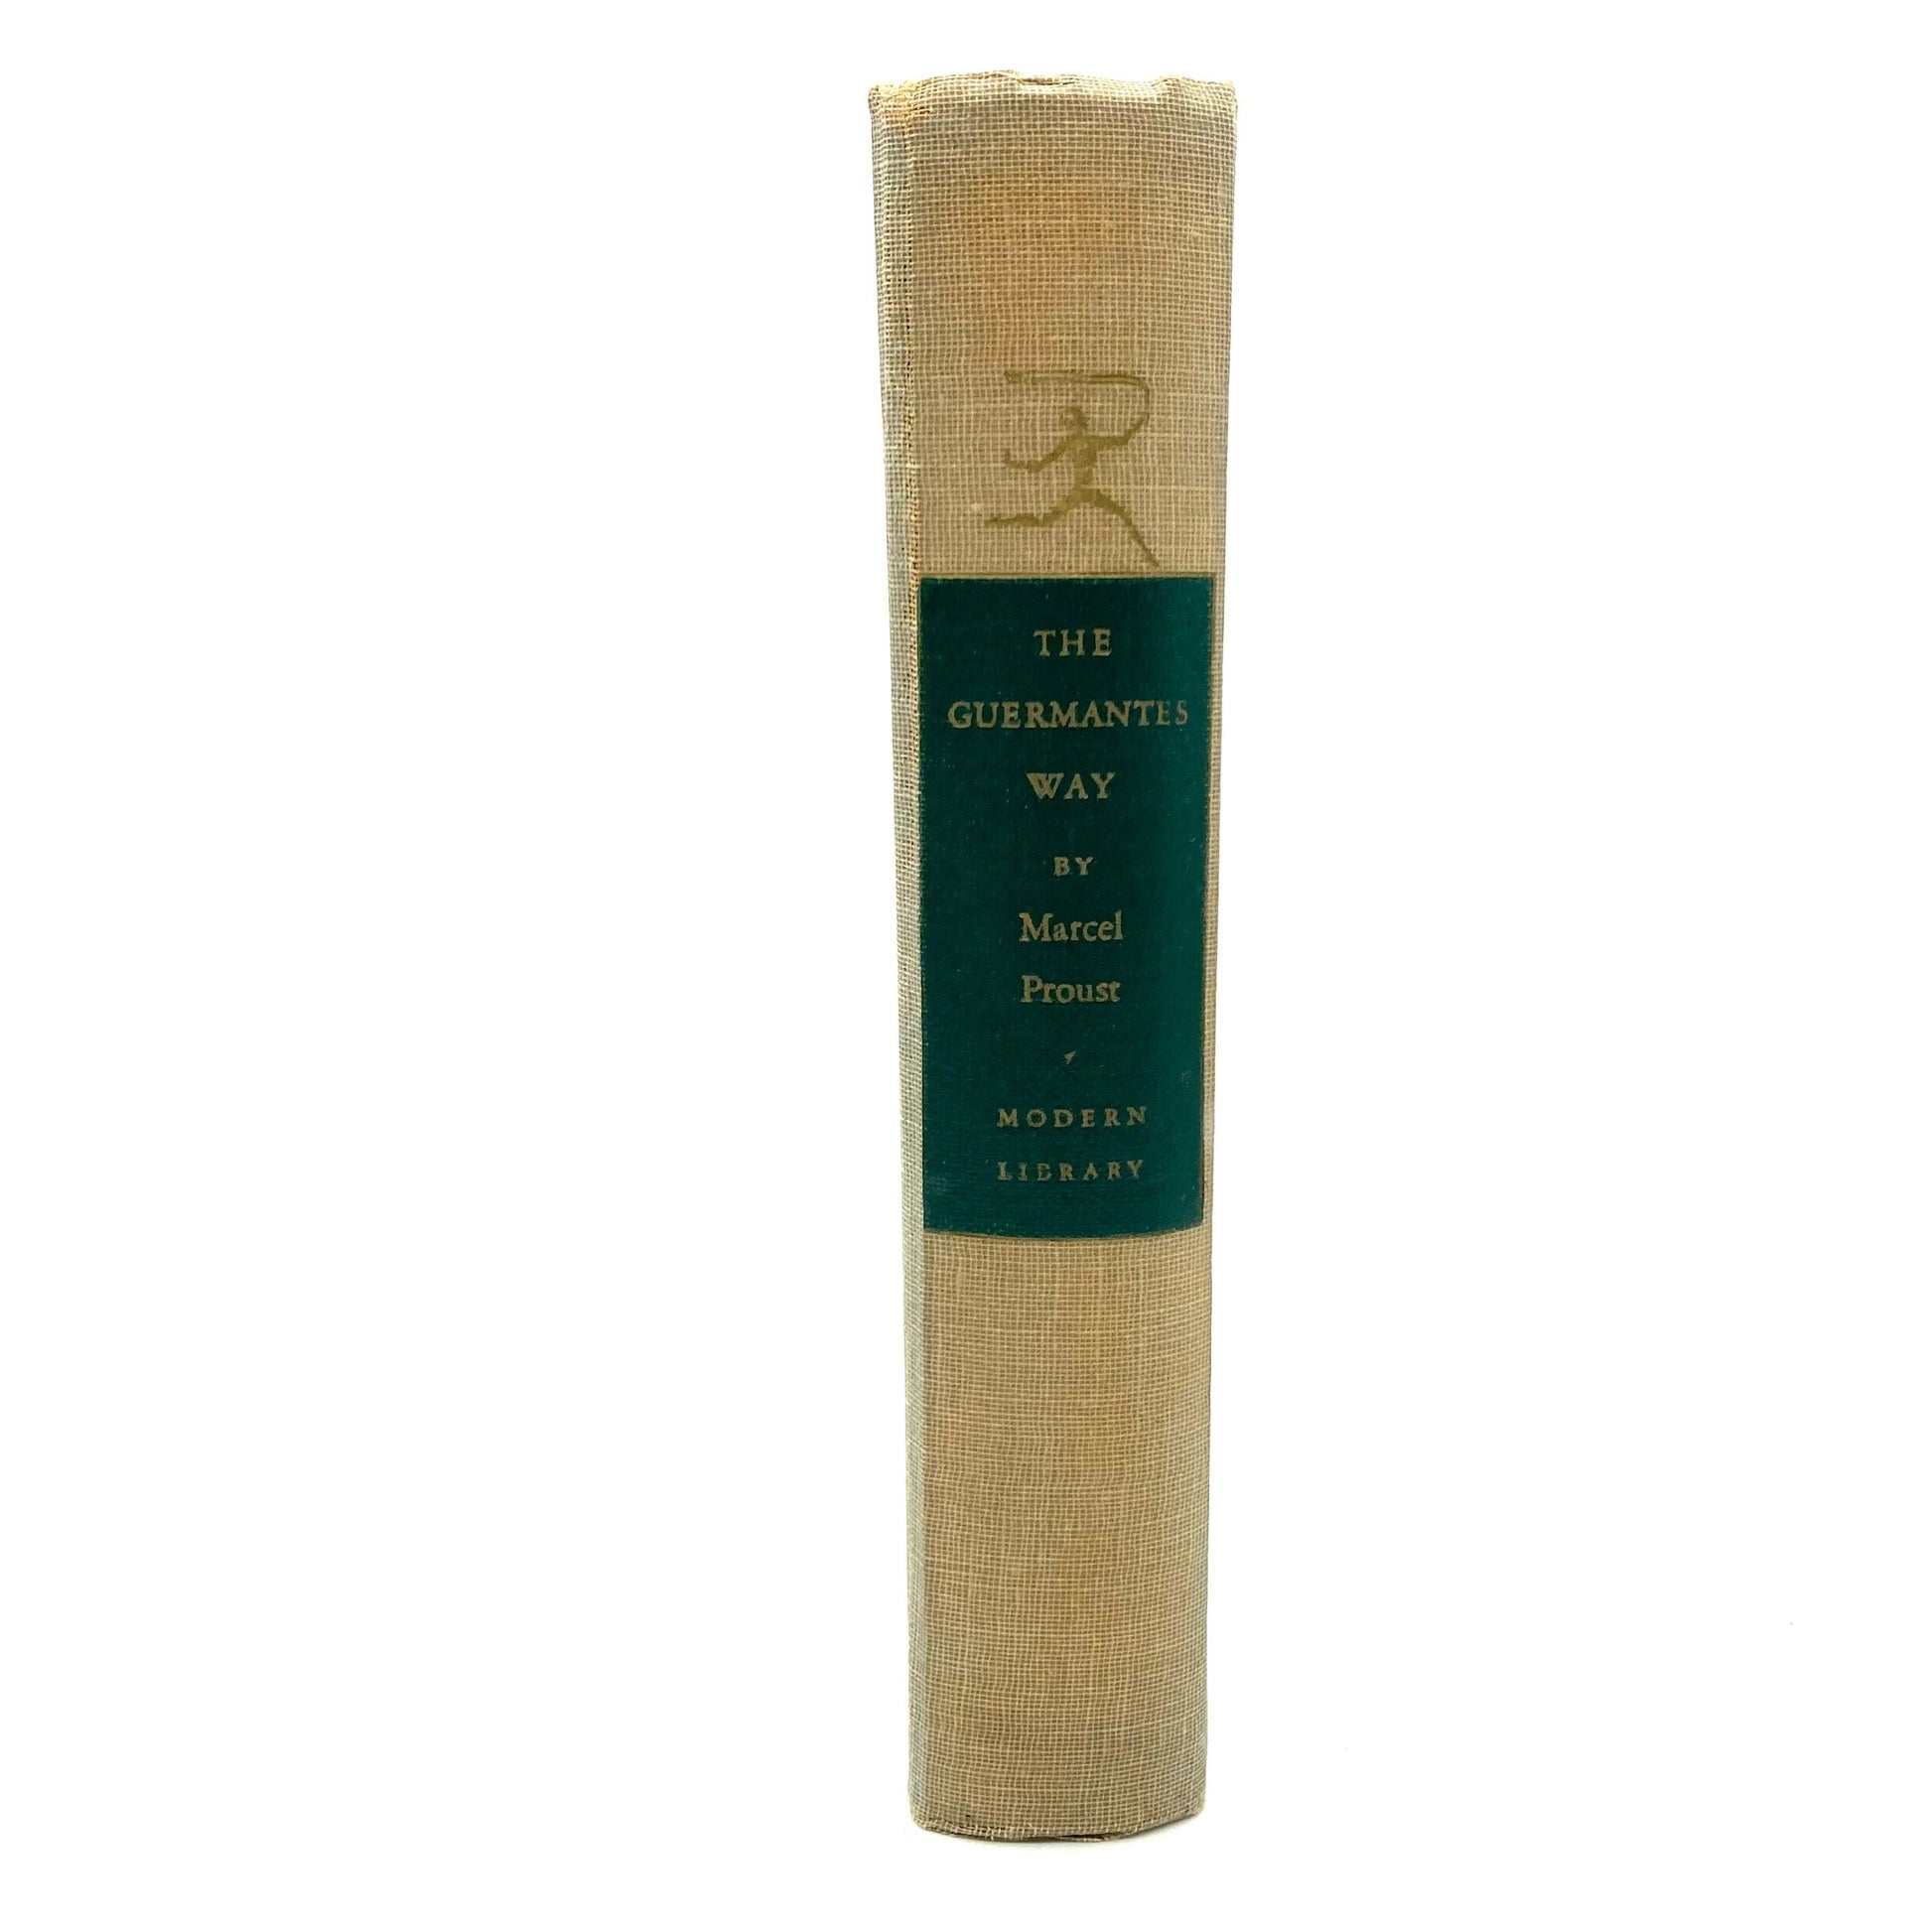 PROUST, Marcel "The Guermantes Way" [Modern Library, 1952] - Buzz Bookstore